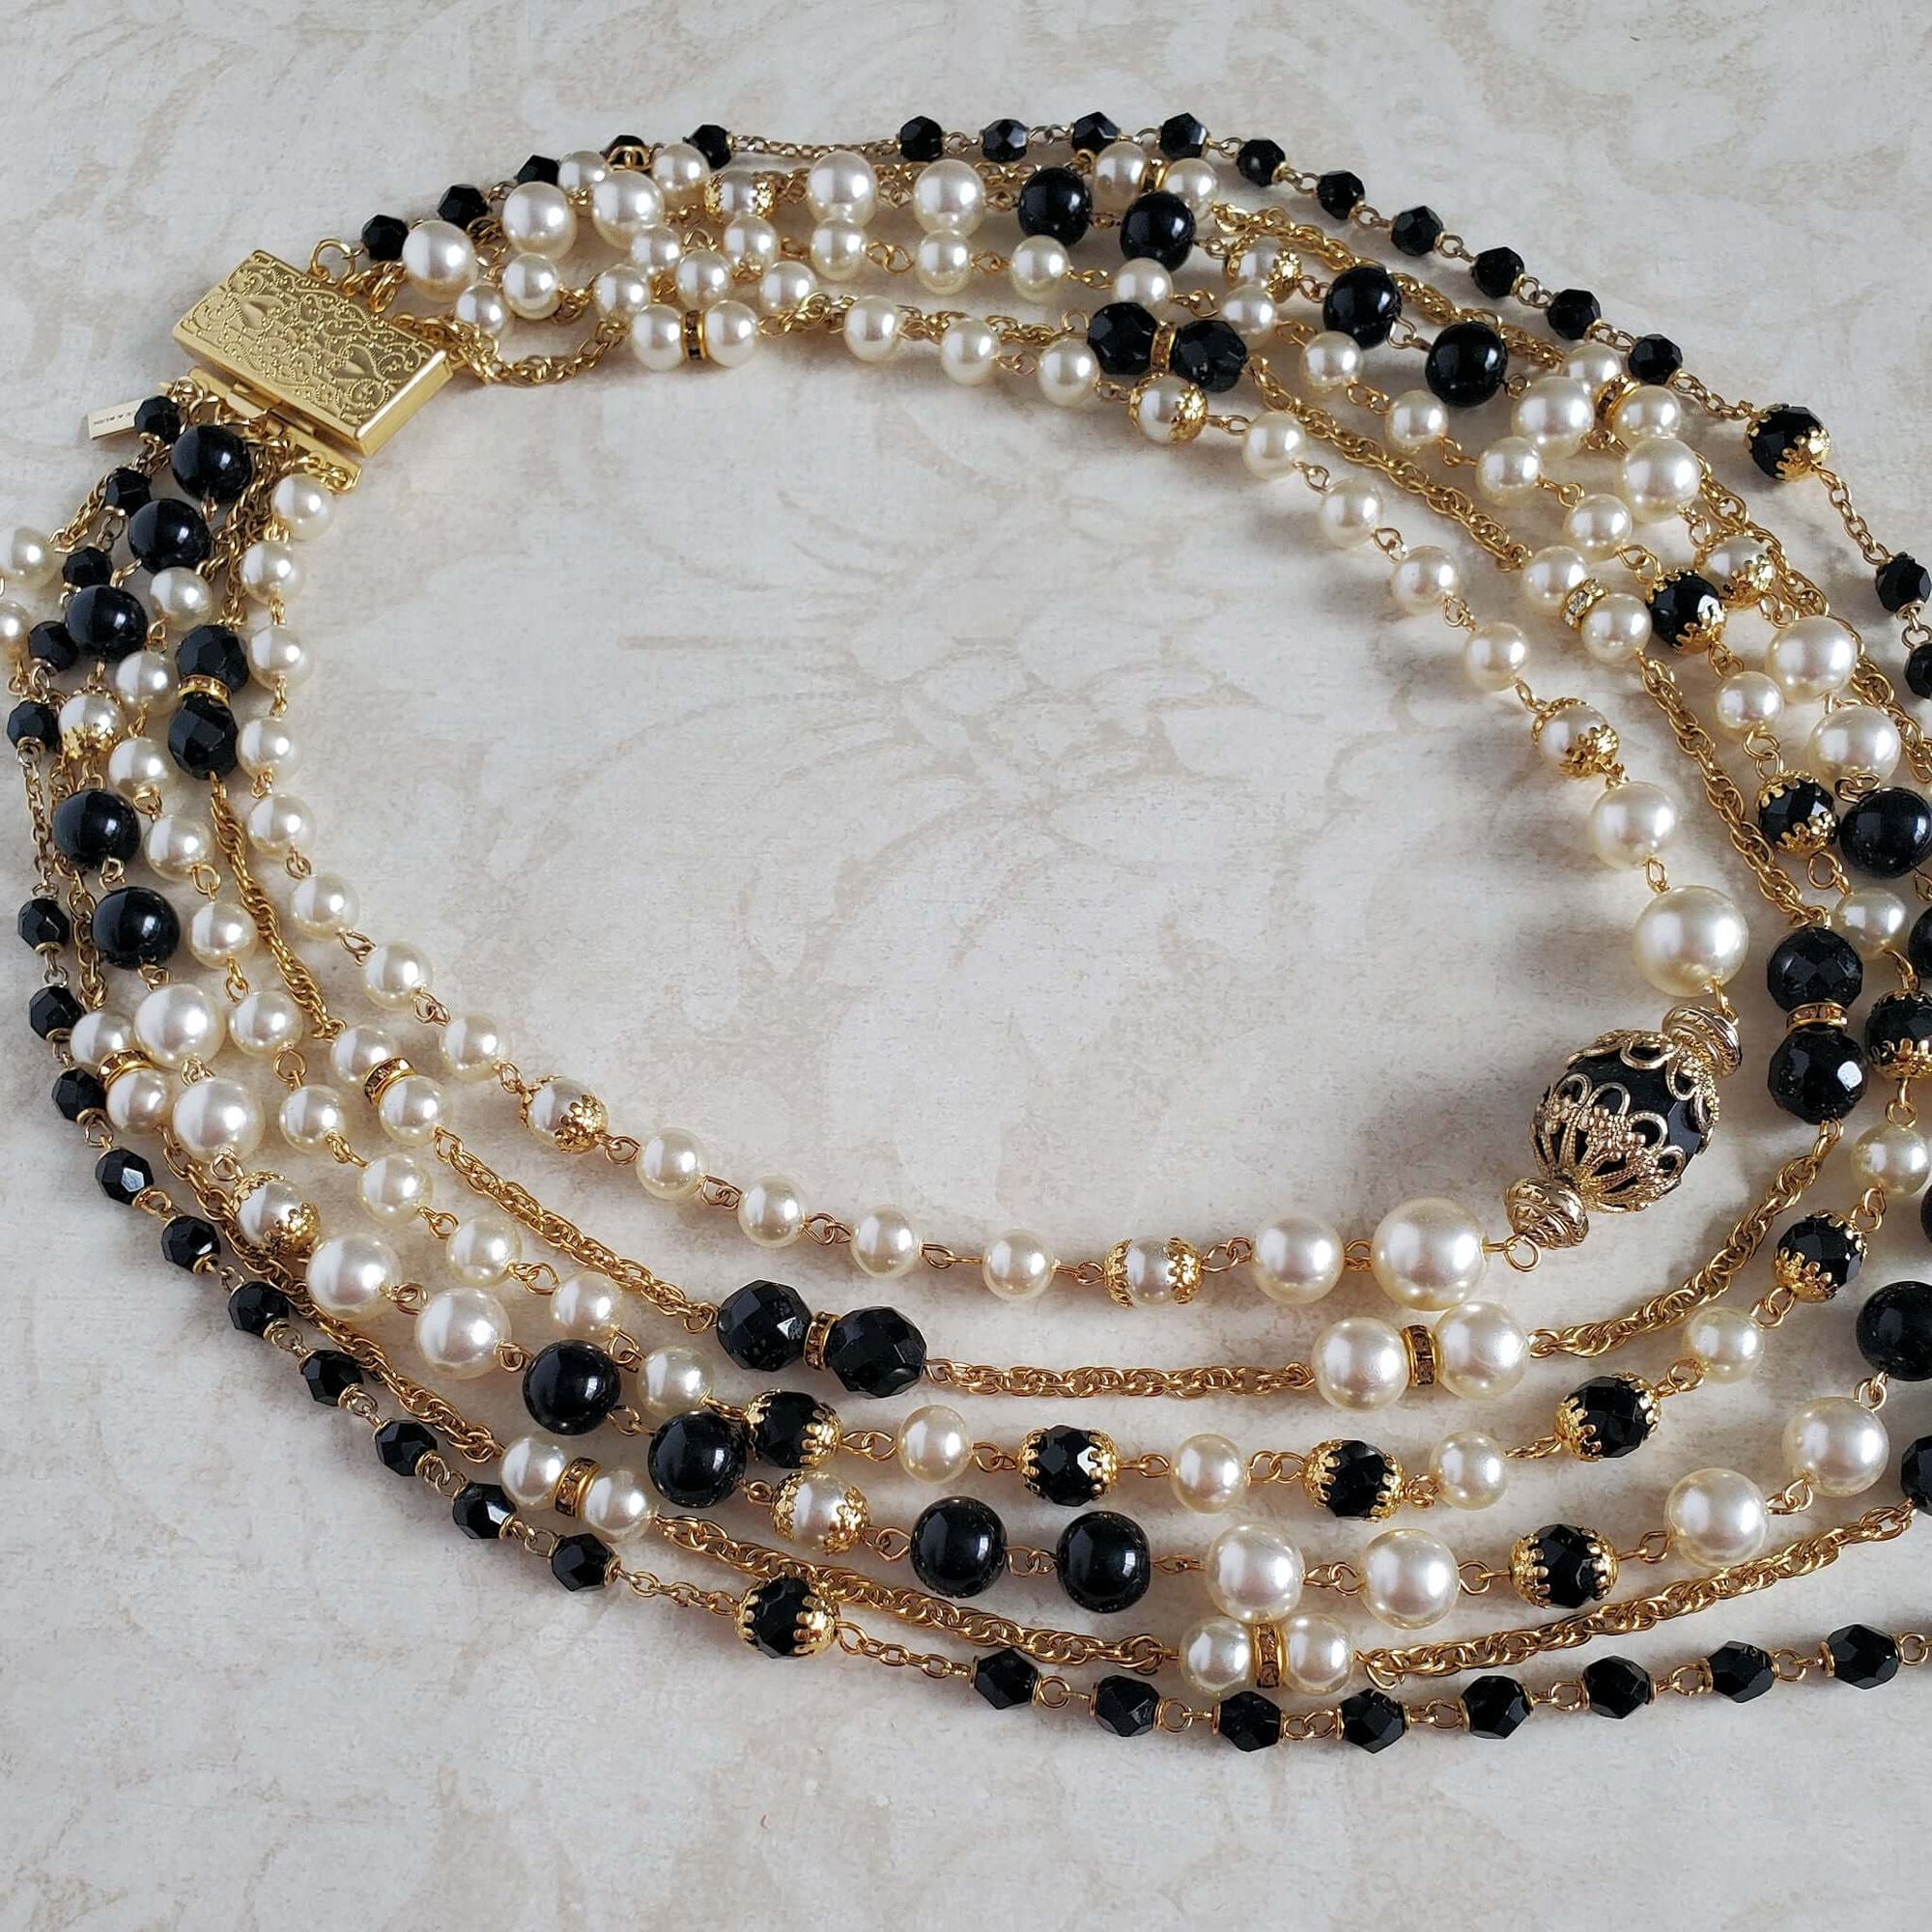 Vintage Pearls , Black Beads and Gold Chain